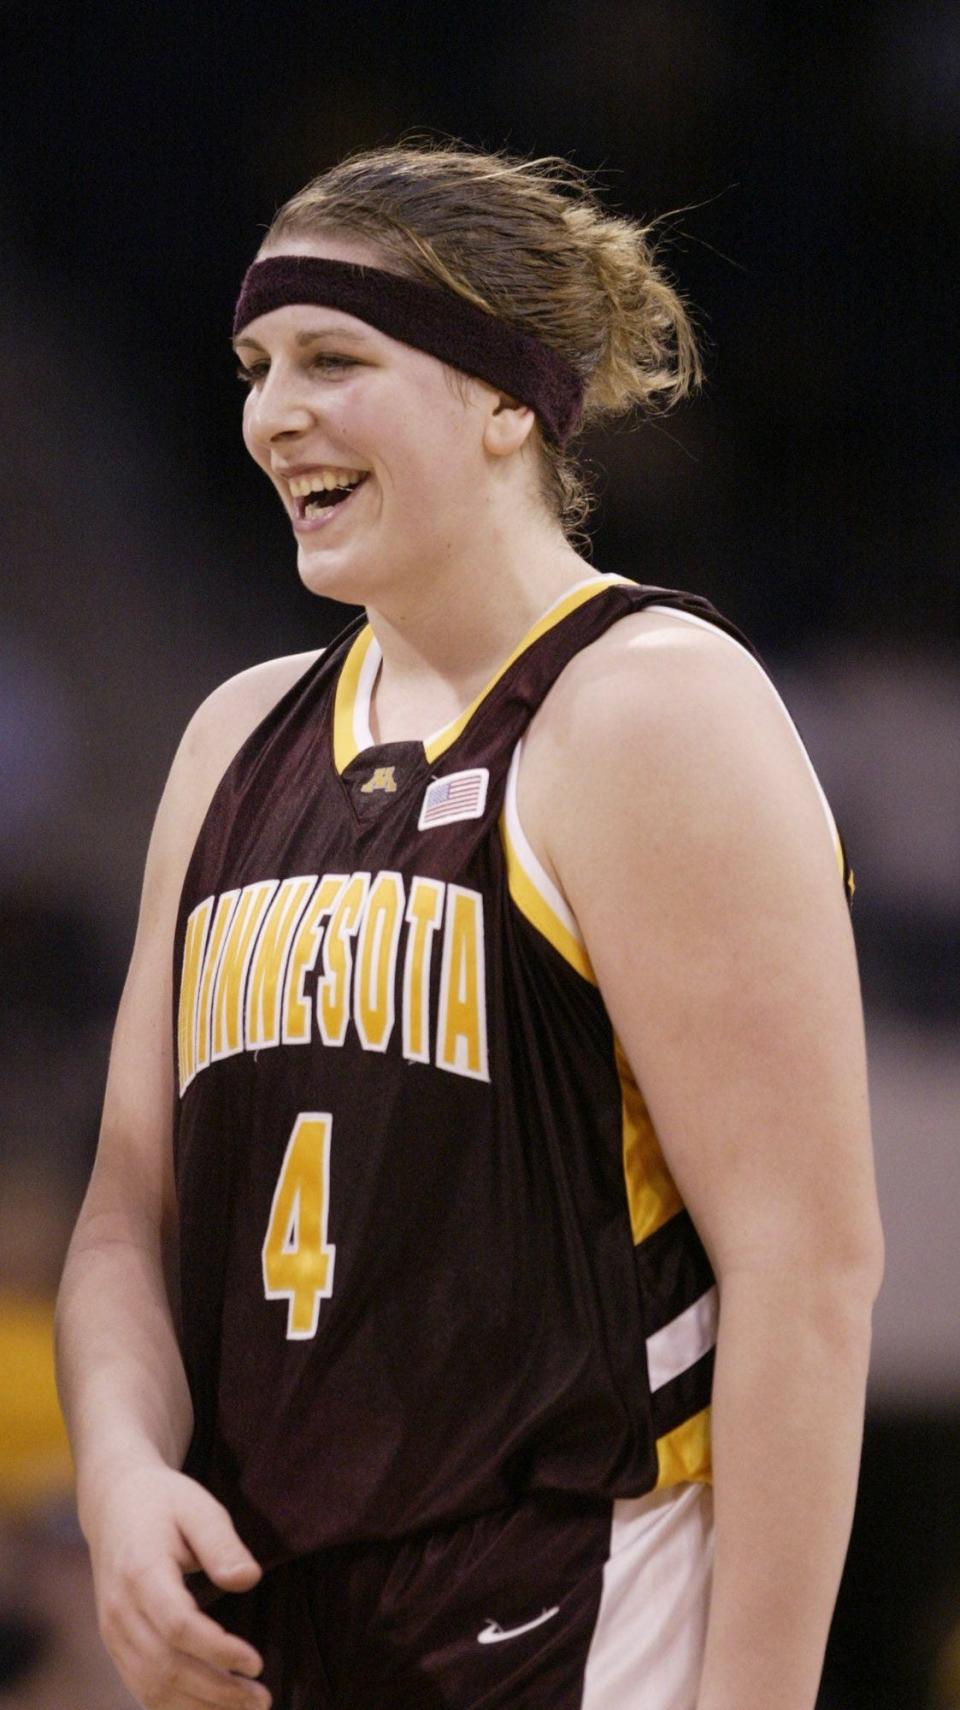 Minnesota's Janel McCarville leaves the court near the end of Minnesota's 76-63 victory over Boston College in their NCAA Mideast Regional semifinal game Sunday, March 28, 2004, at the Ted Constant Convocation Center in Norfolk, Va. McCarville led Minnesota with 25 points.